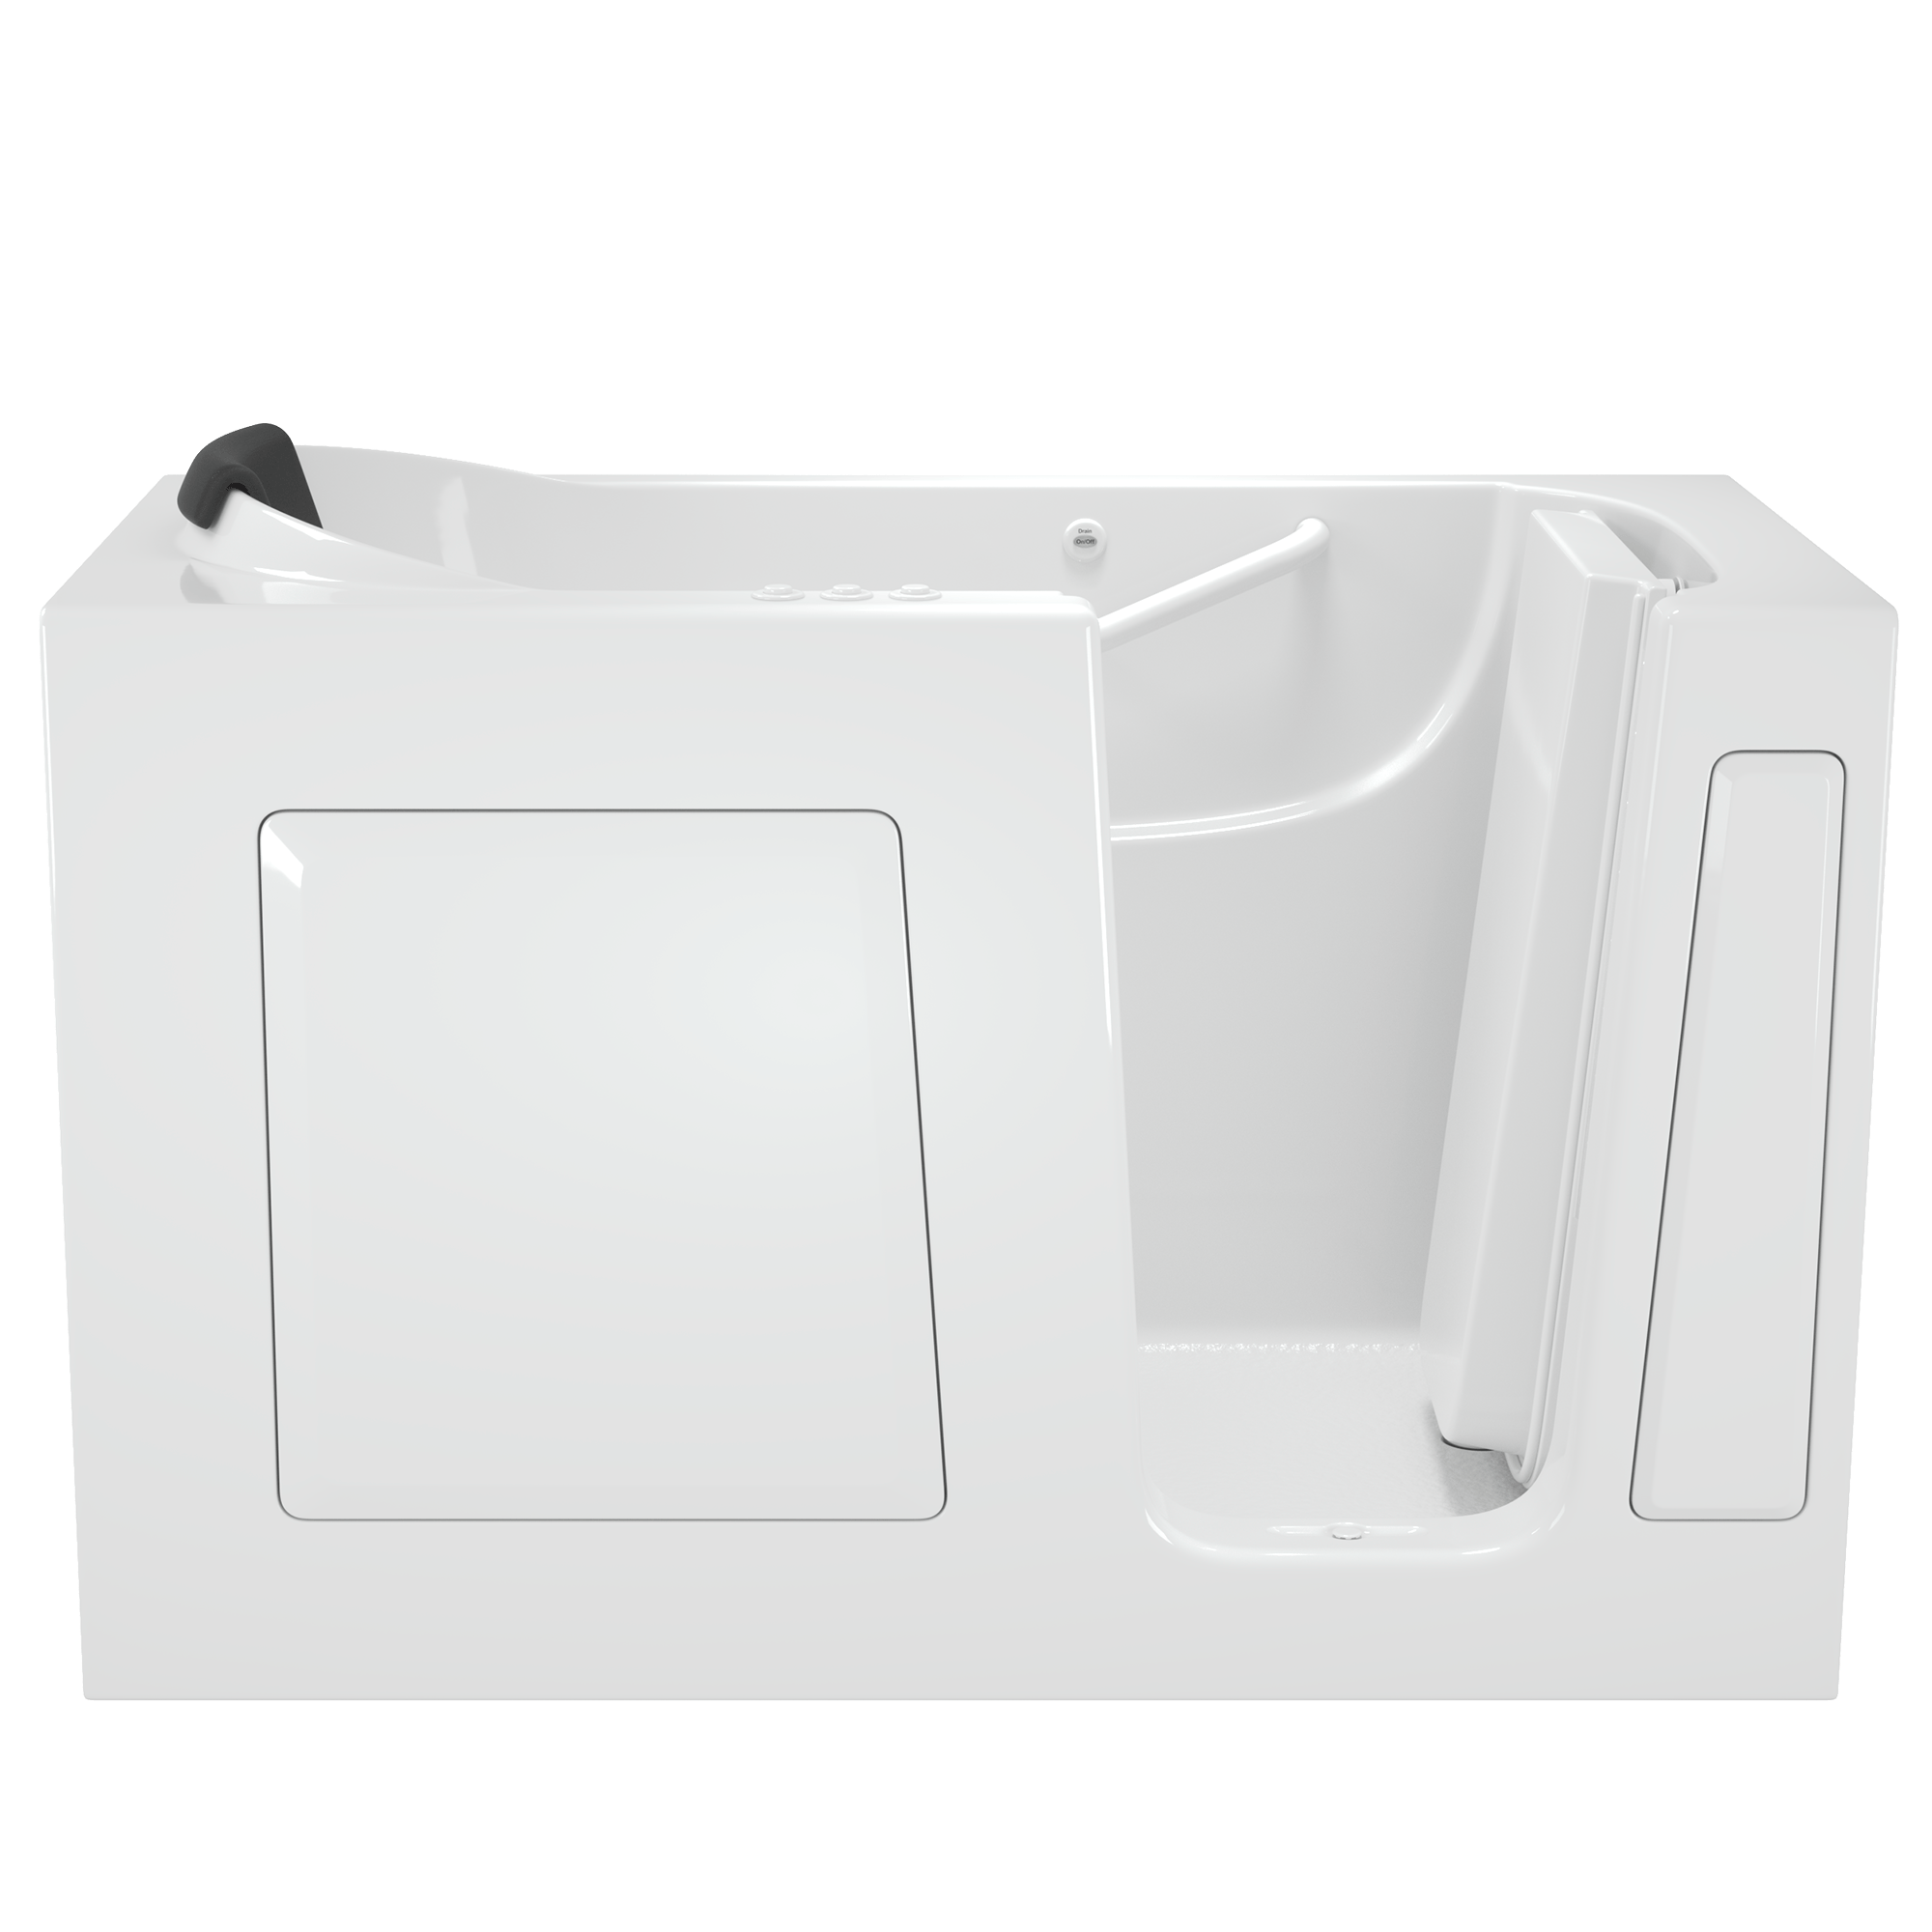 Gelcoat Premium Series 30 x 60 -Inch Walk-in Tub With Combination Air Spa and Whirlpool Systems - Right-Hand Drain